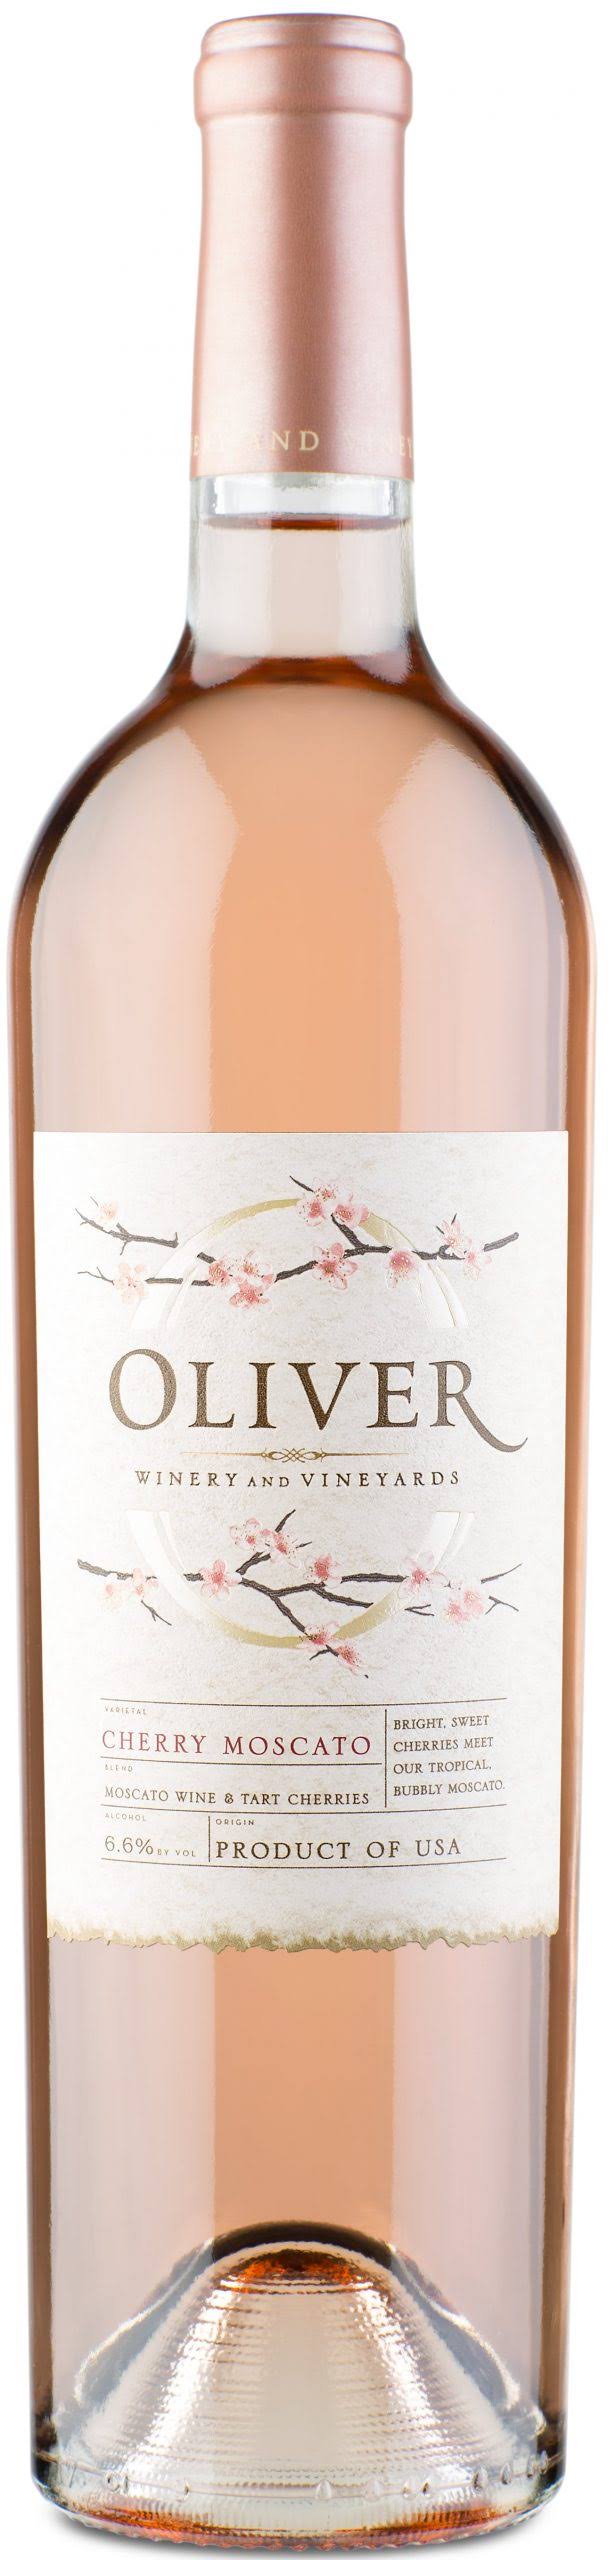 Oliver Cherry Muscat - Indiana, USA